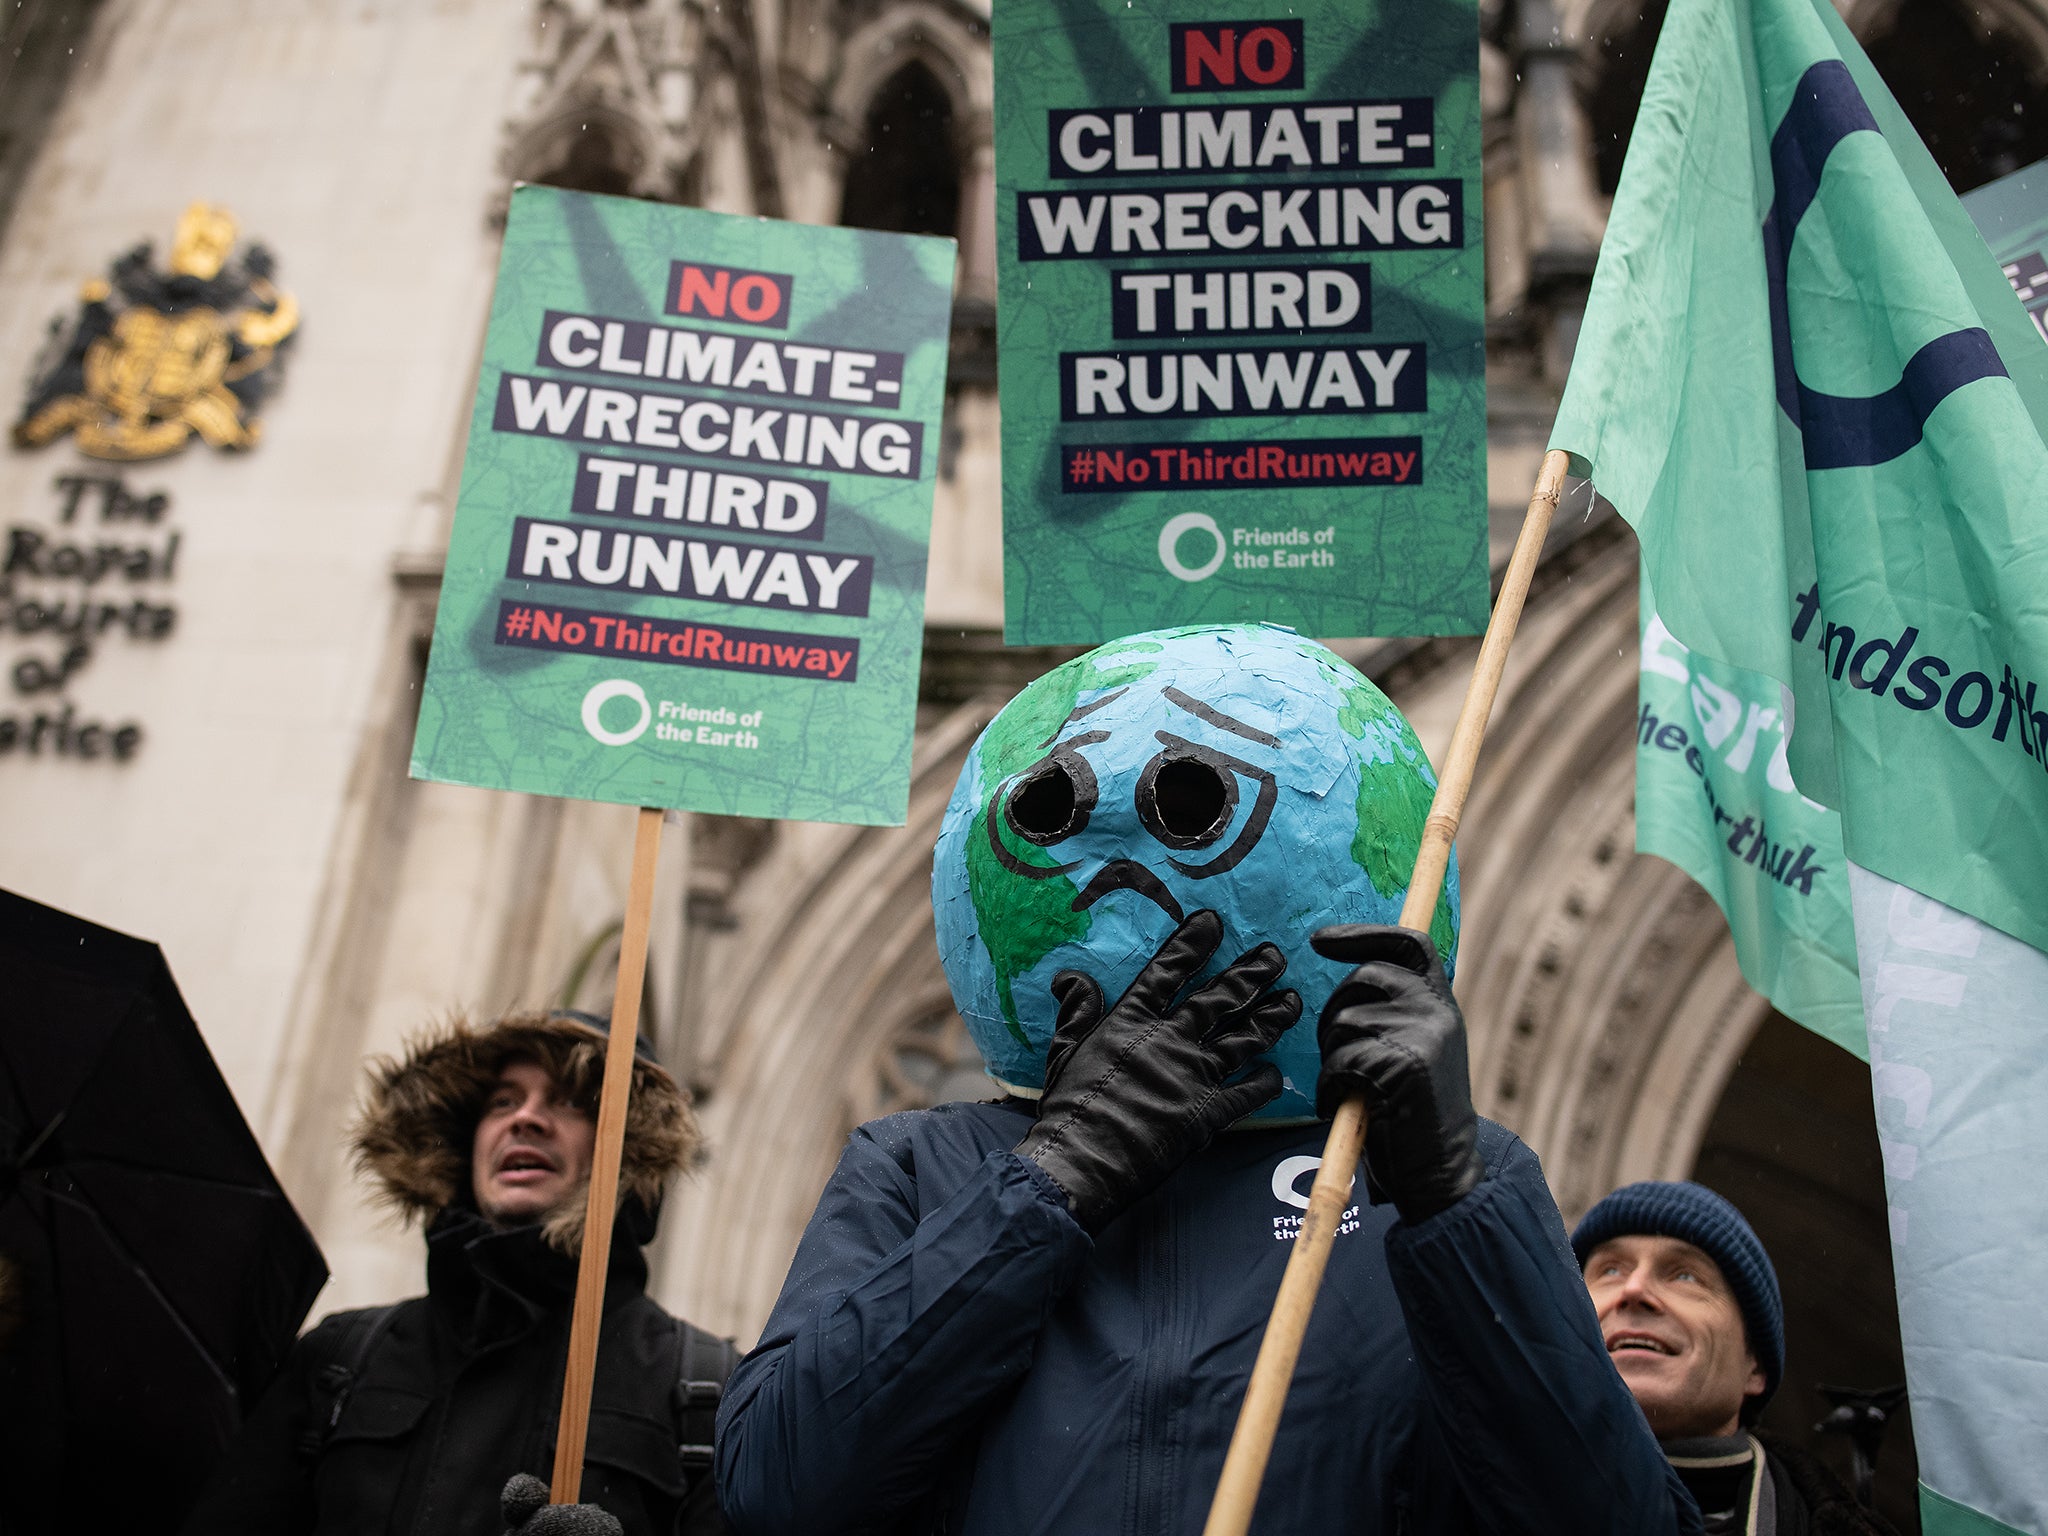 Climate activists protest against plans for third runway at Heathrow